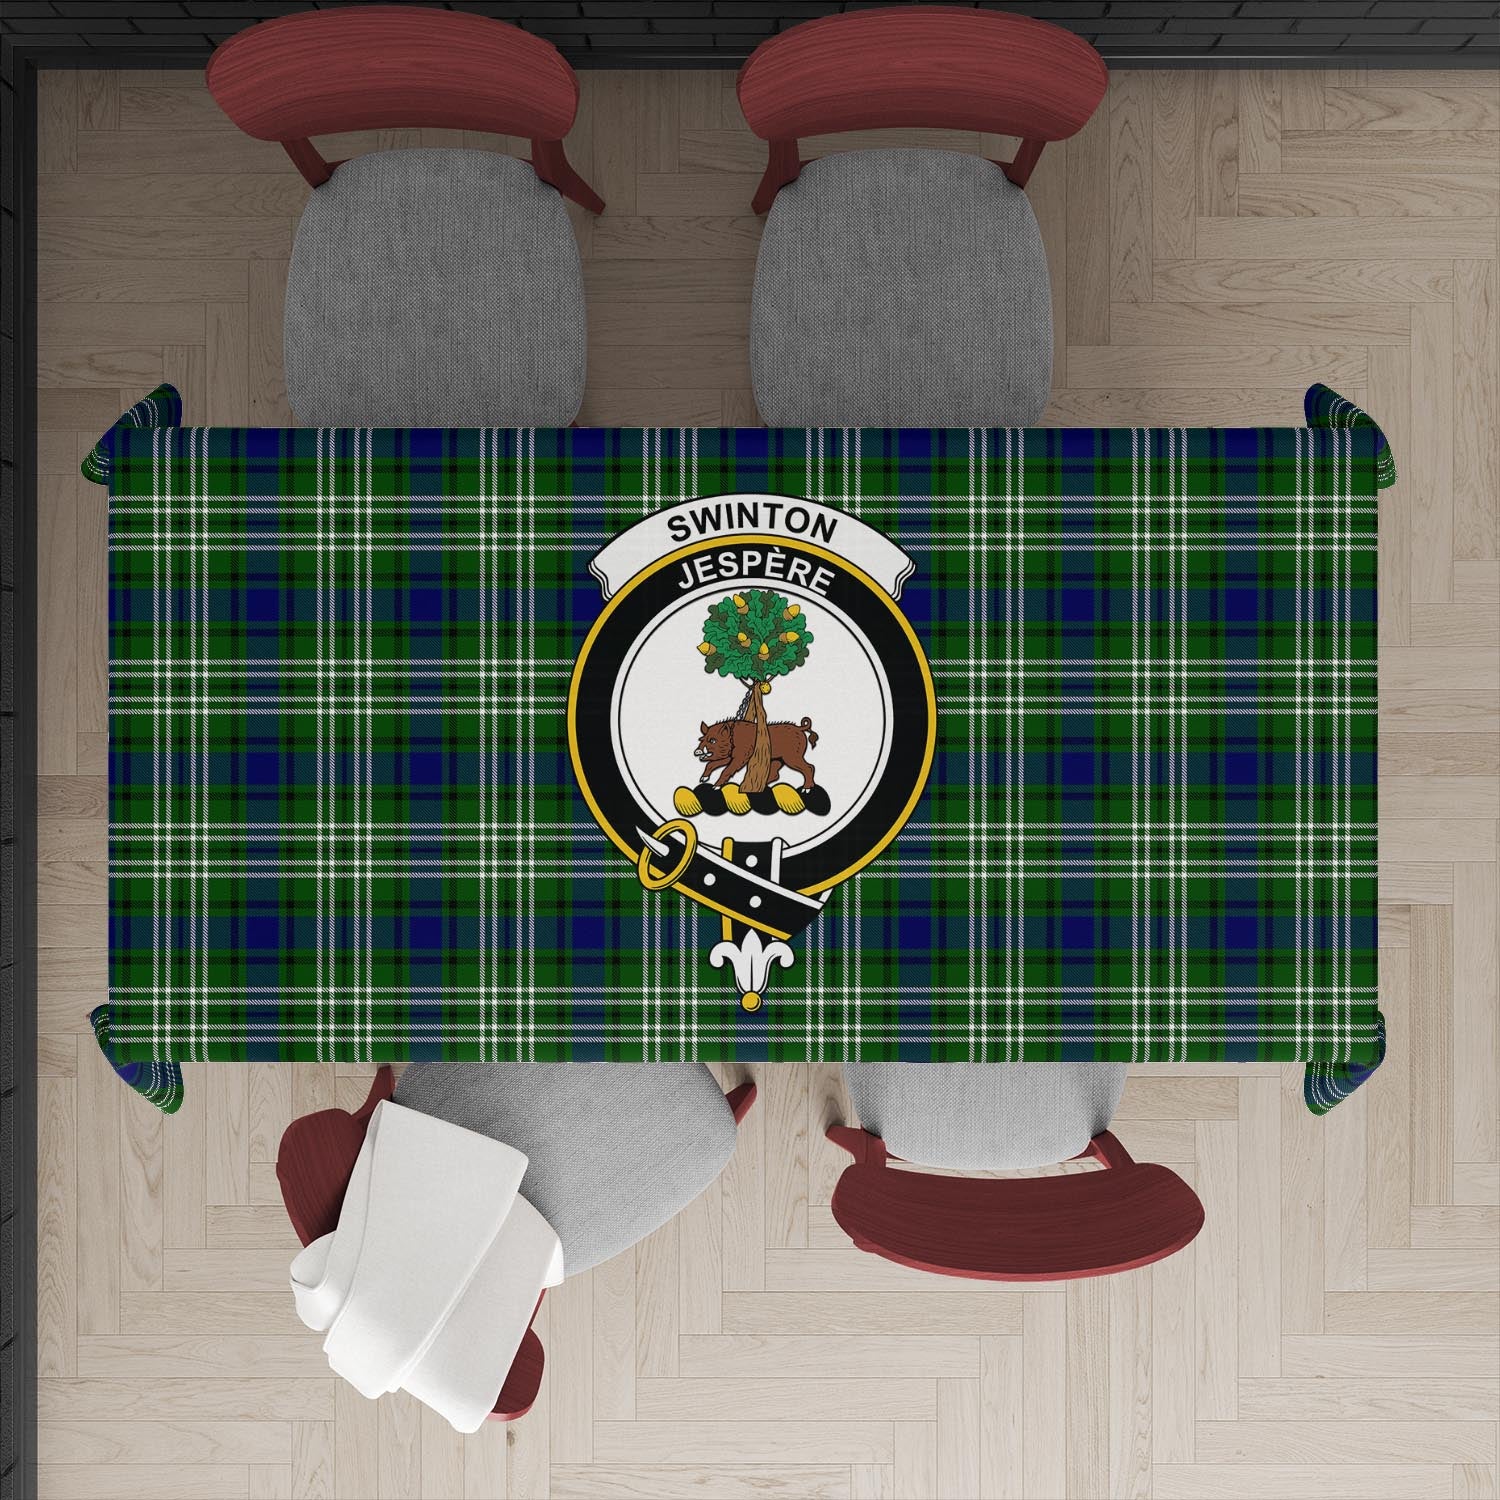 swinton-tatan-tablecloth-with-family-crest